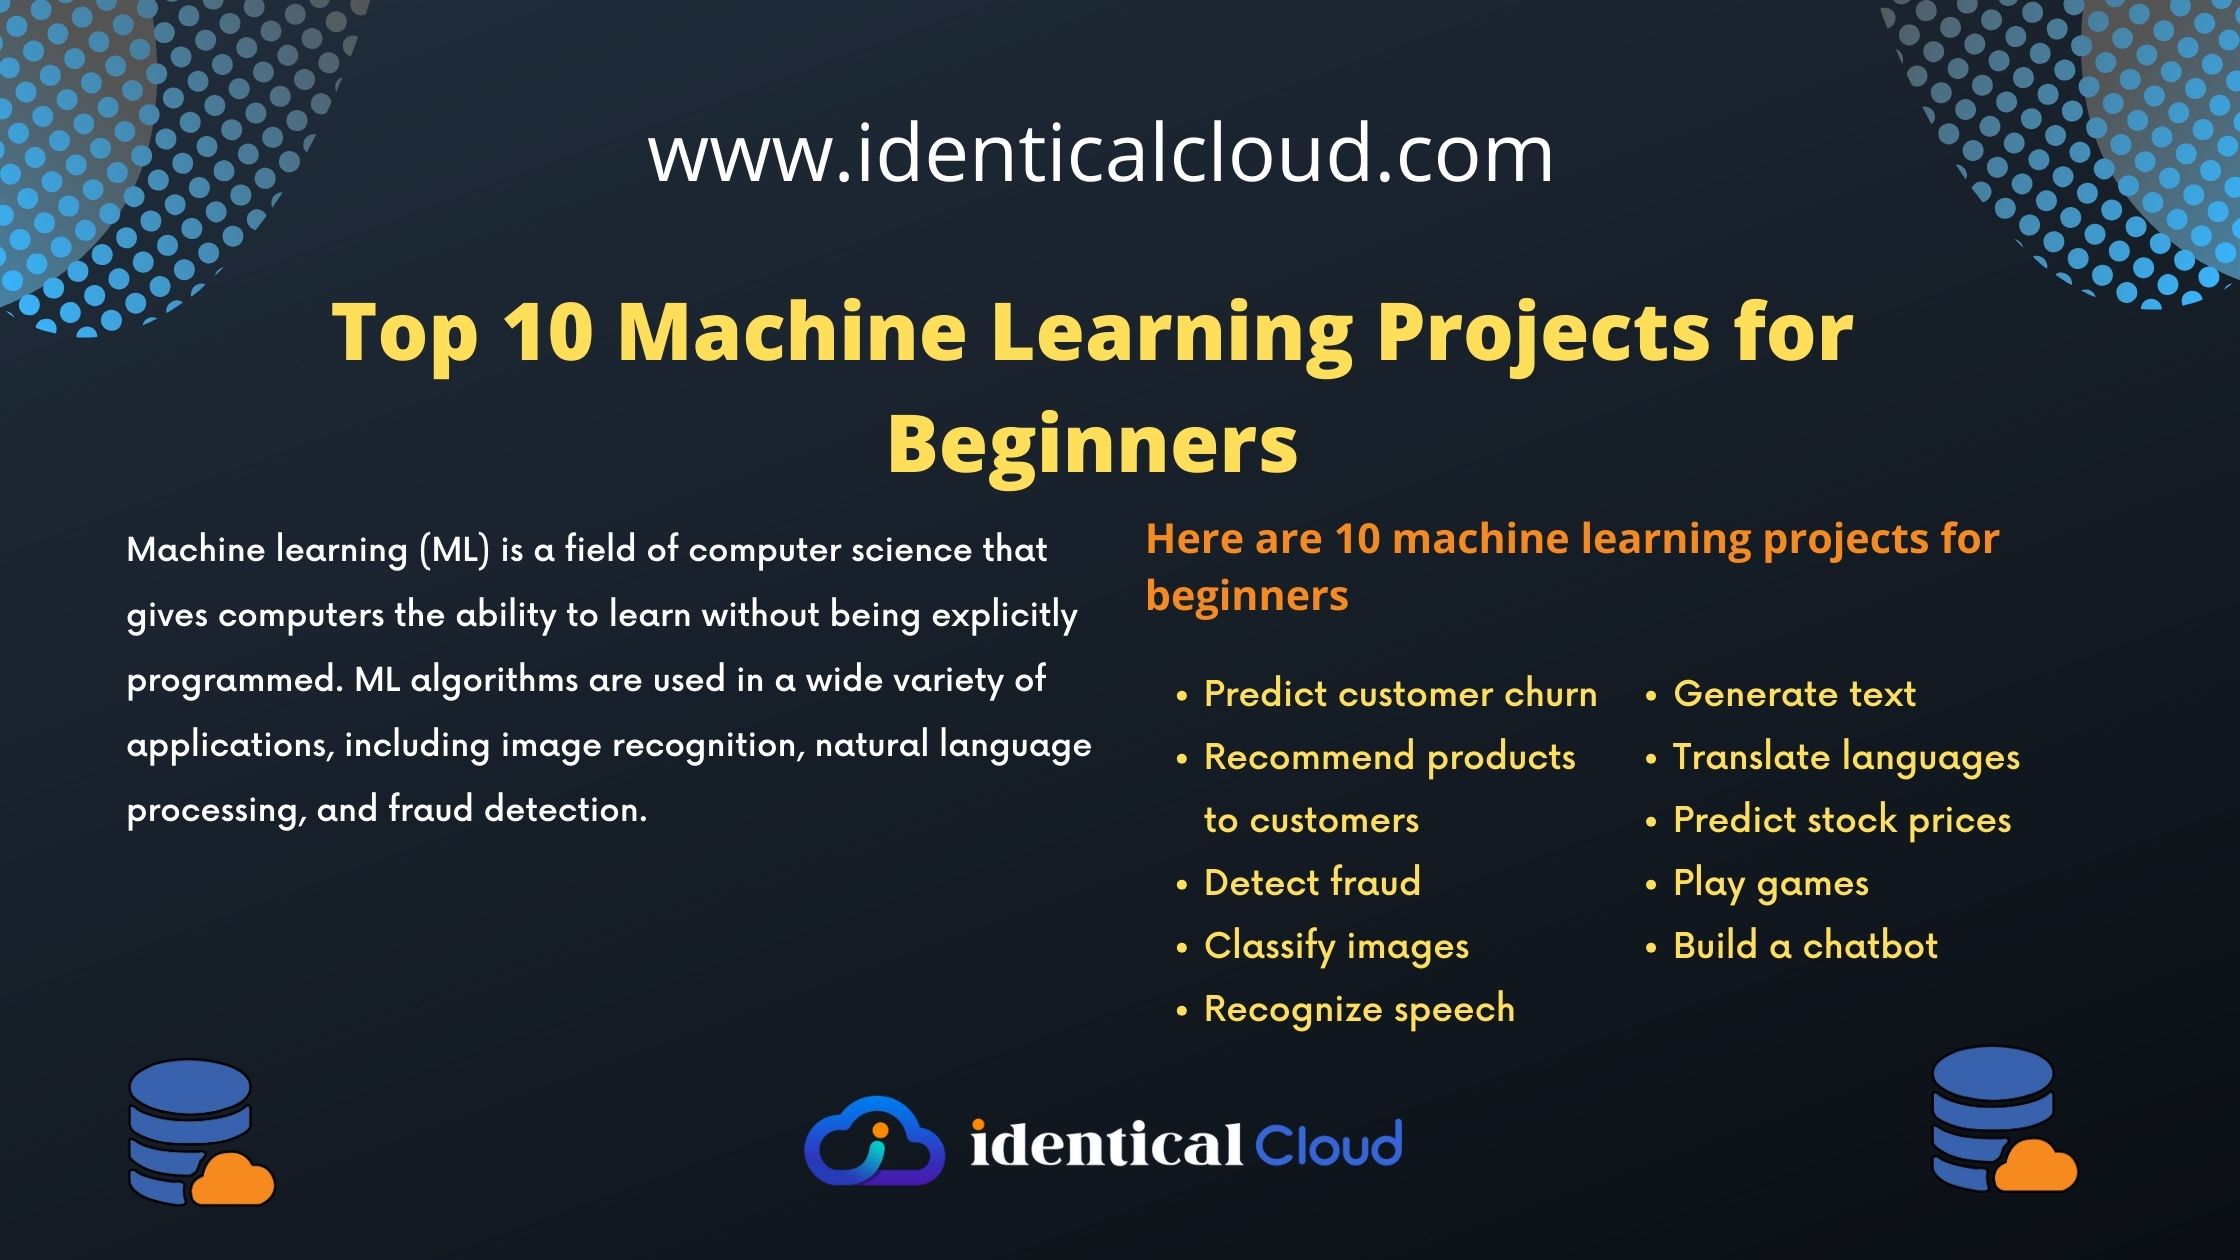 Top 10 Machine Learning Projects for Beginners - identicalcloud.com